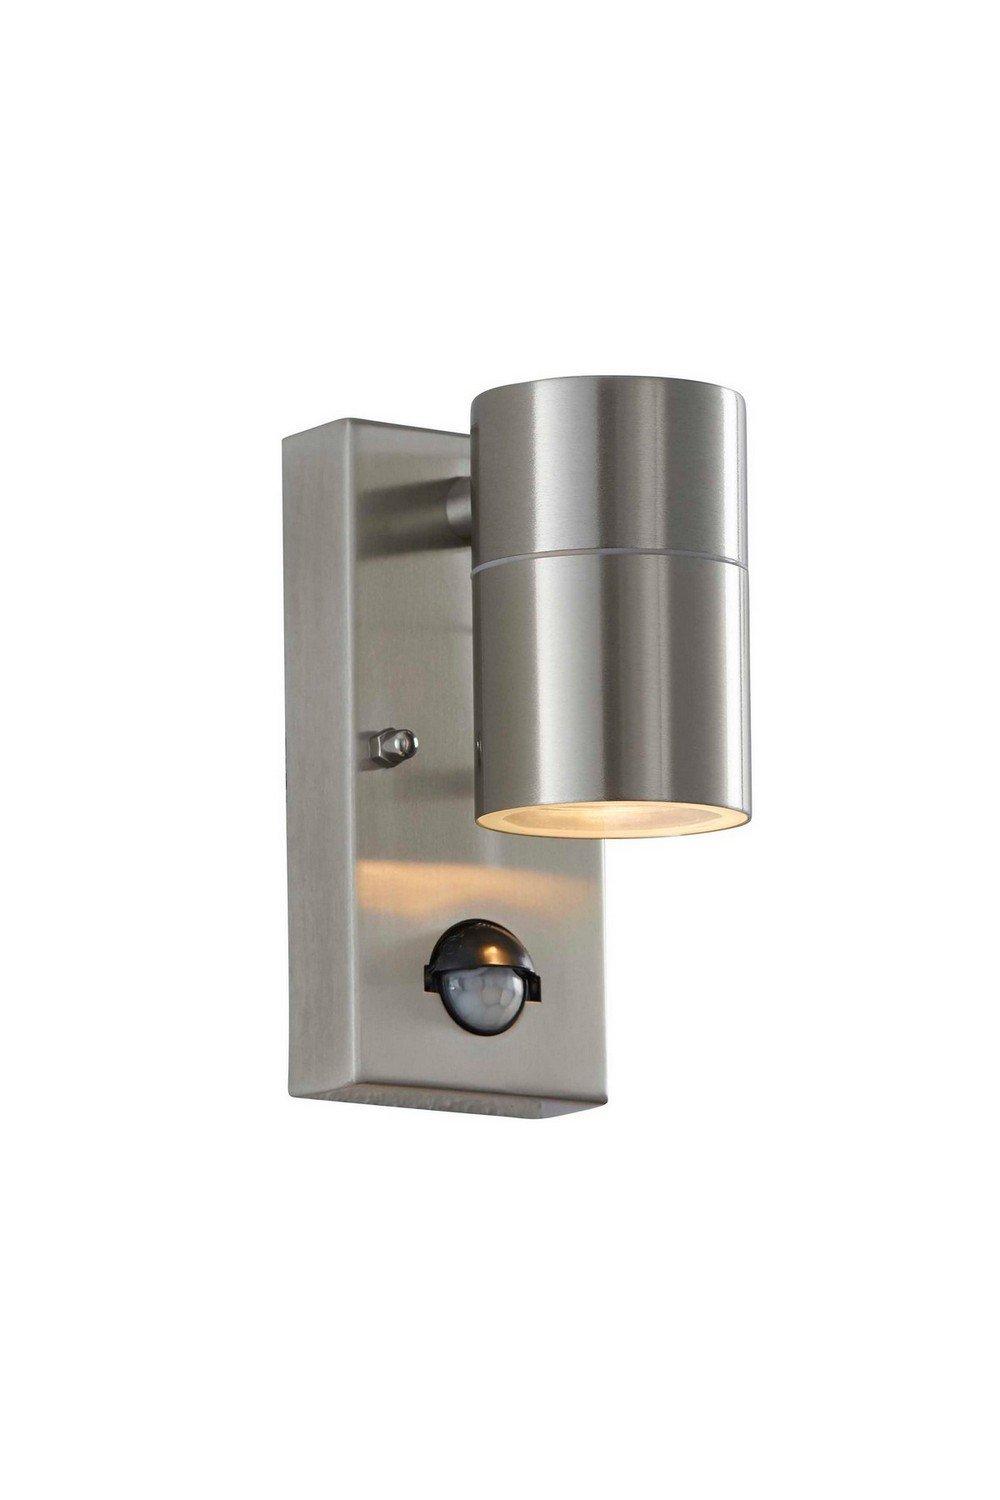 Canon PIR 1 Light Outdoor Wall Light Clear Glass Polished Stainless Steel IP44 GU10